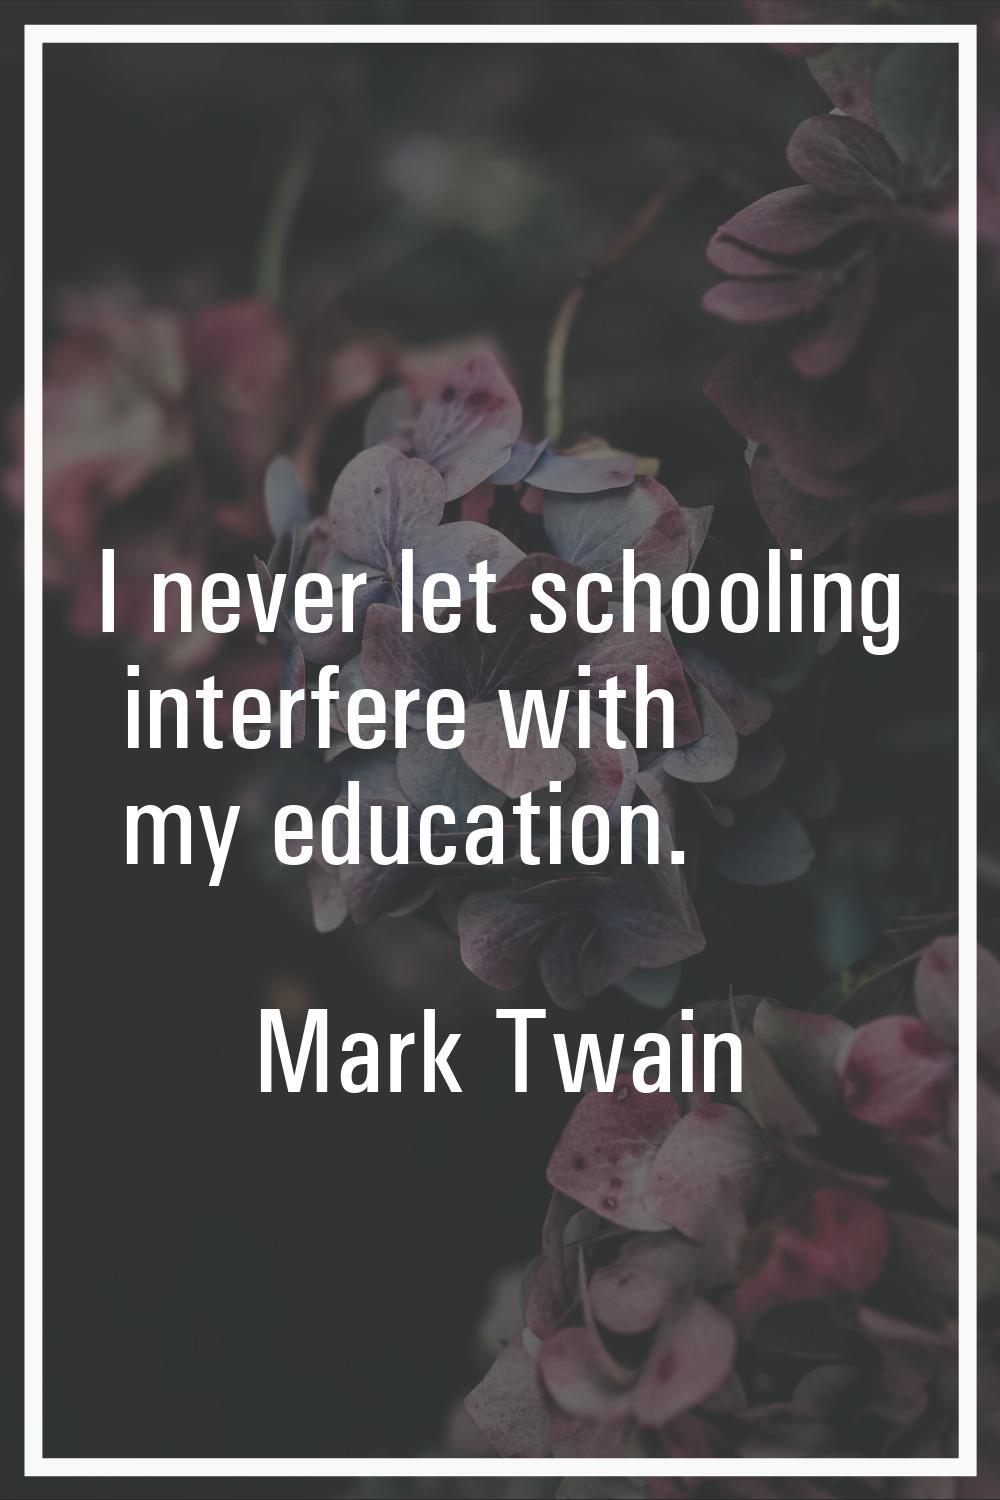 I never let schooling interfere with my education.